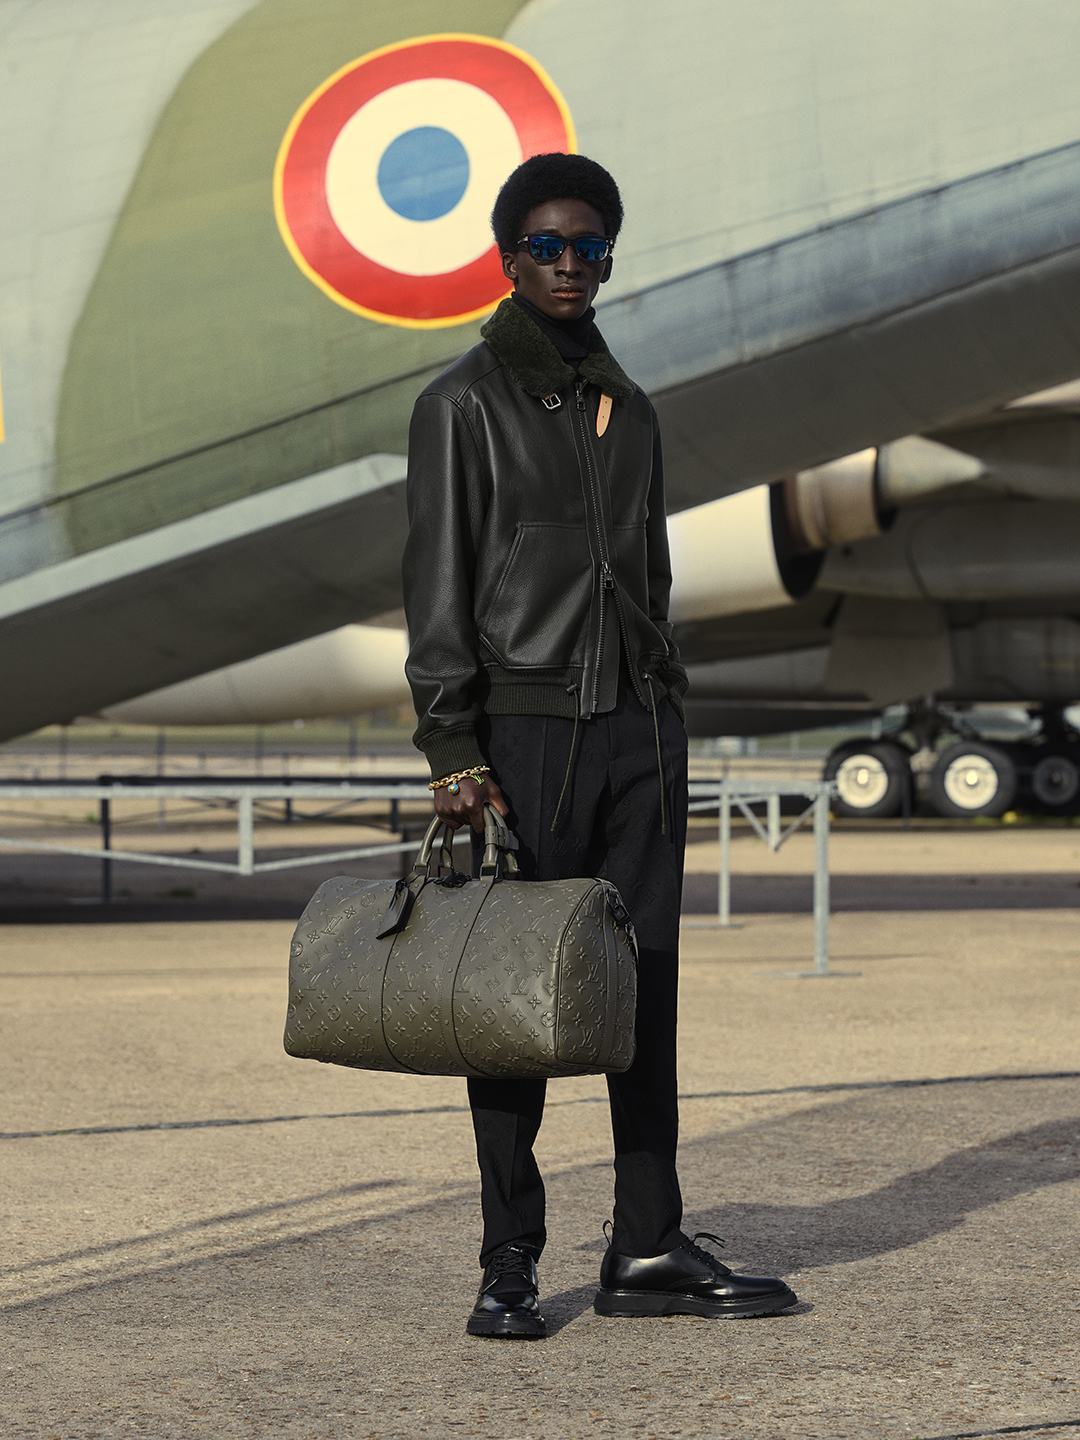 Louis Vuitton is striking for Men's Pre-fall Collection 2018 - LUXUO